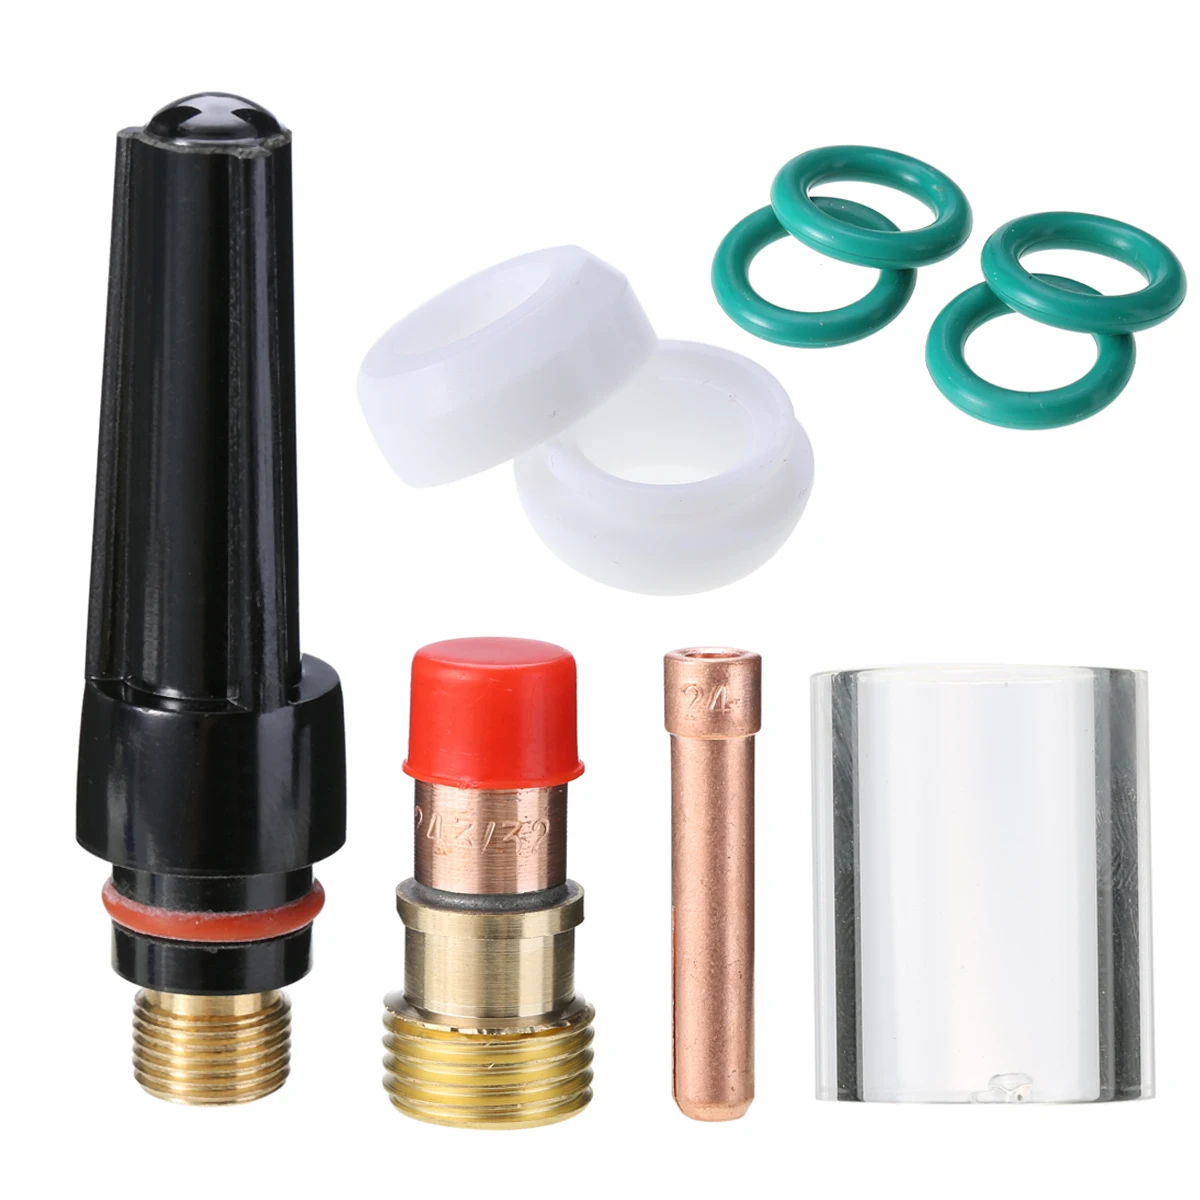 9pcs//Kit WP-17//18//26 TIG Welding Torch Stubby Collets Gas Lens Insulator O-rings